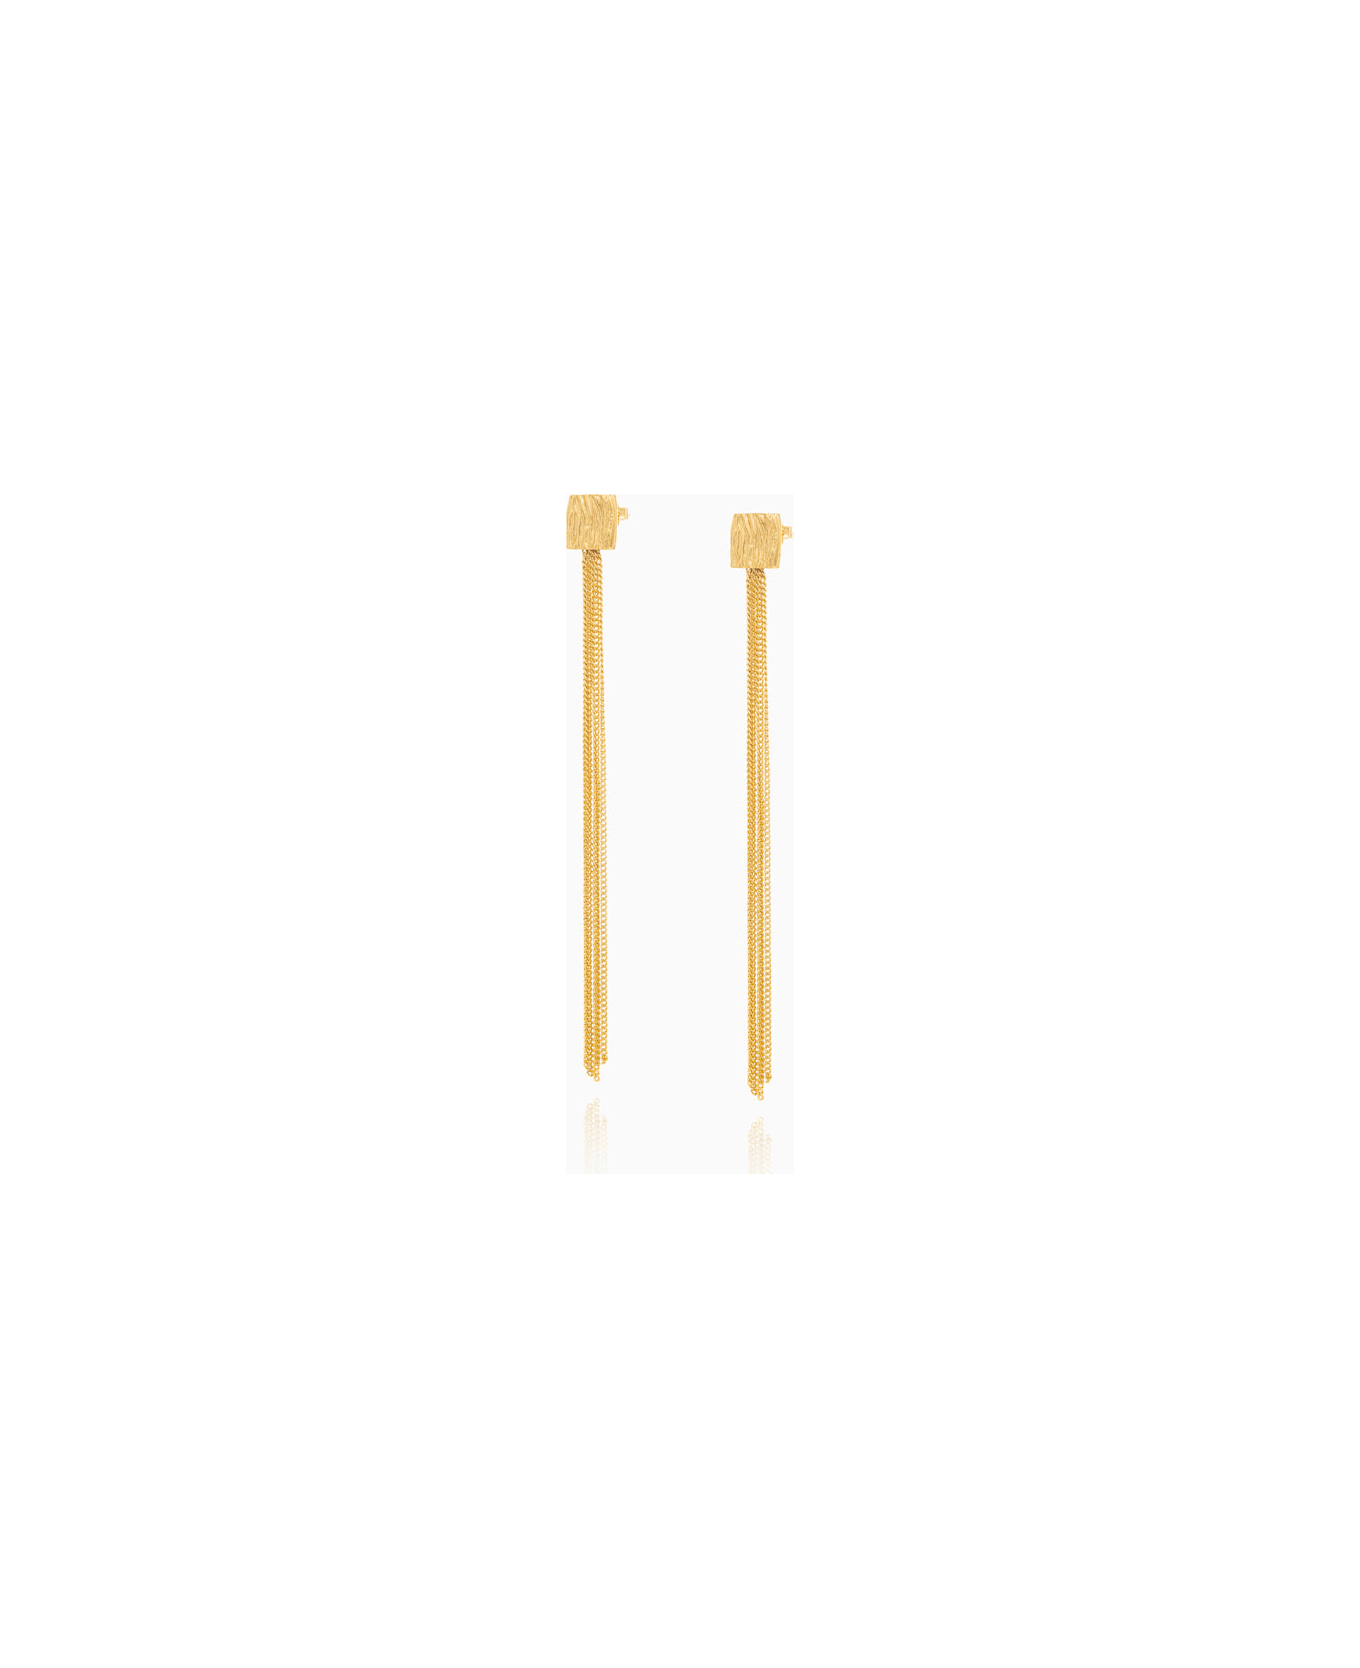 Federica Tosi Earring Long Daisy Gold - Gold